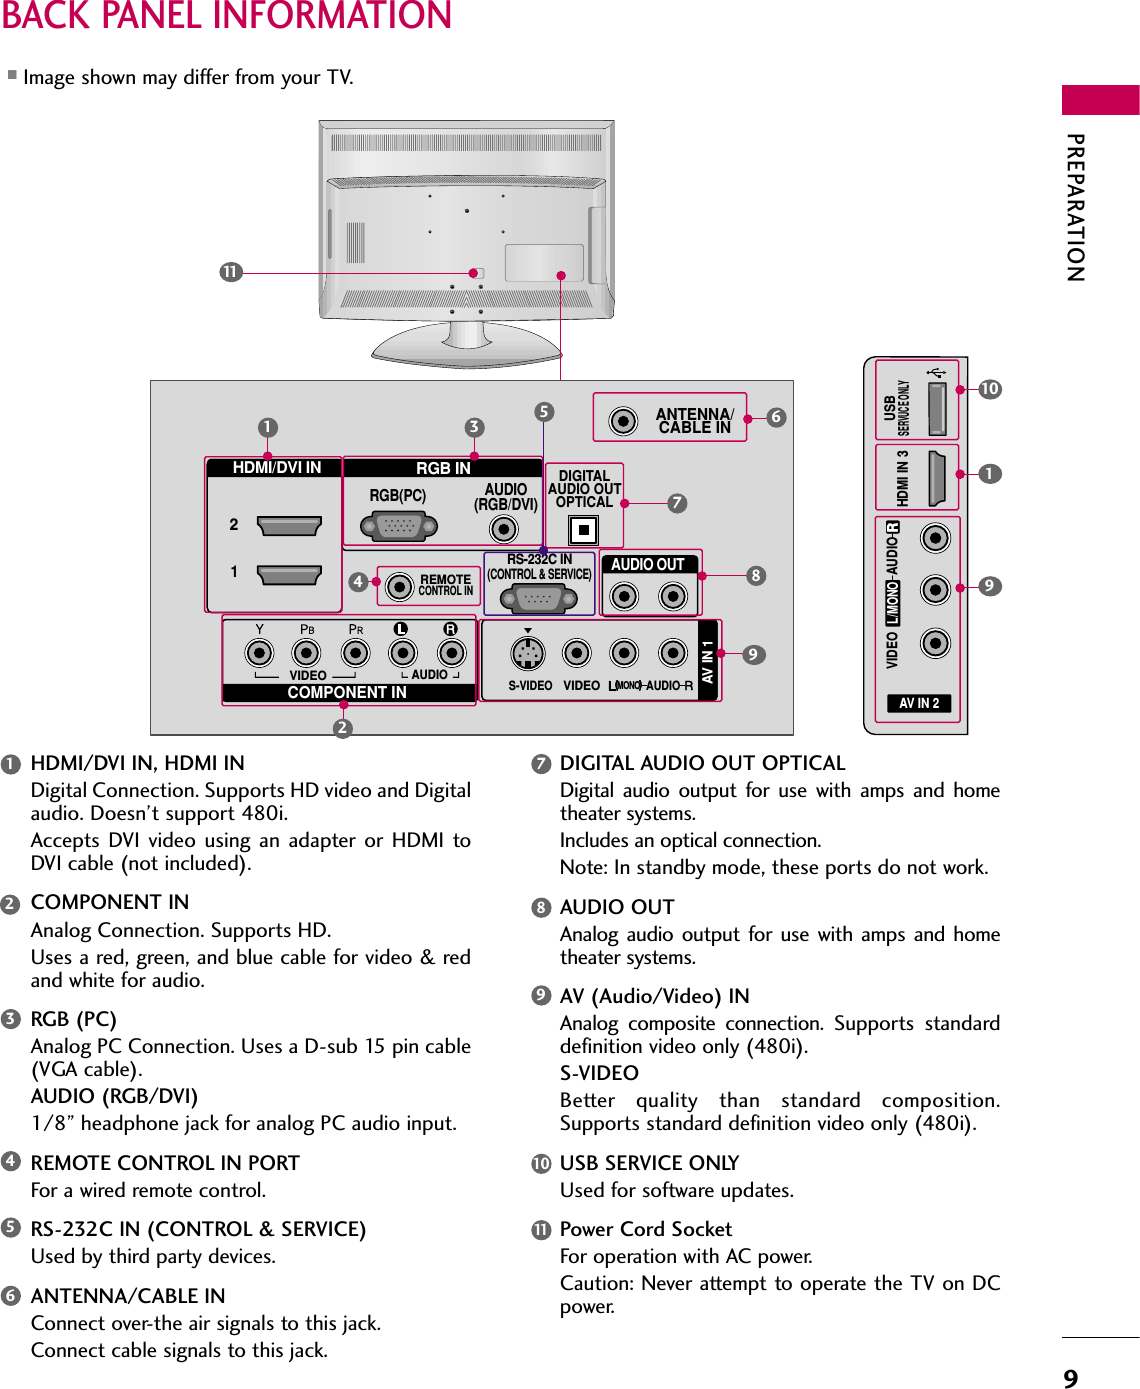 PREPARATION9BACK PANEL INFORMATION■Image shown may differ from your TV.R(            )COMPONENT INAUDIO(RGB/DVI)RGB(PC)REMOTECONTROL INANTENNA/CABLE INRS-232C IN(CONTROL &amp; SERVICE)VIDEOAUDIODIGITALAUDIO OUTOPTICALAUDIO OUTAV IN 1RVIDEOMONO(            )AUDIOS-VIDEO21RGB INHDMI/DVI IN314678295AV IN 2L/MONORAUDIOVIDEOUSBSERVUCE ONLYHDMI IN 3(            )910111HDMI/DVI IN, HDMI INDigital Connection. Supports HD video and Digitalaudio. Doesn’t support 480i. Accepts  DVI  video  using  an  adapter  or  HDMI  toDVI cable (not included).COMPONENT INAnalog Connection. Supports HD. Uses a red, green, and blue cable for video &amp; redand white for audio.RGB (PC)Analog PC Connection. Uses a D-sub 15 pin cable(VGA cable).AUDIO (RGB/DVI)1/8” headphone jack for analog PC audio input.REMOTE CONTROL IN PORTFor a wired remote control.RS-232C IN (CONTROL &amp; SERVICE)Used by third party devices.ANTENNA/CABLE INConnect over-the air signals to this jack.Connect cable signals to this jack.DIGITAL AUDIO OUT OPTICALDigital  audio  output  for  use  with  amps  and  hometheater systems. Includes an optical connection.Note: In standby mode, these ports do not work.AUDIO OUTAnalog  audio  output  for  use  with  amps  and  hometheater systems.AV (Audio/Video) INAnalog  composite  connection. Supports  standarddefinition video only (480i).S-VIDEOBetter  quality  than  standard  composition.Supports standard definition video only (480i).USB SERVICE ONLYUsed for software updates.Power Cord SocketFor operation with AC power. Caution: Never attempt to operate the TV on DCpower.1234569101178